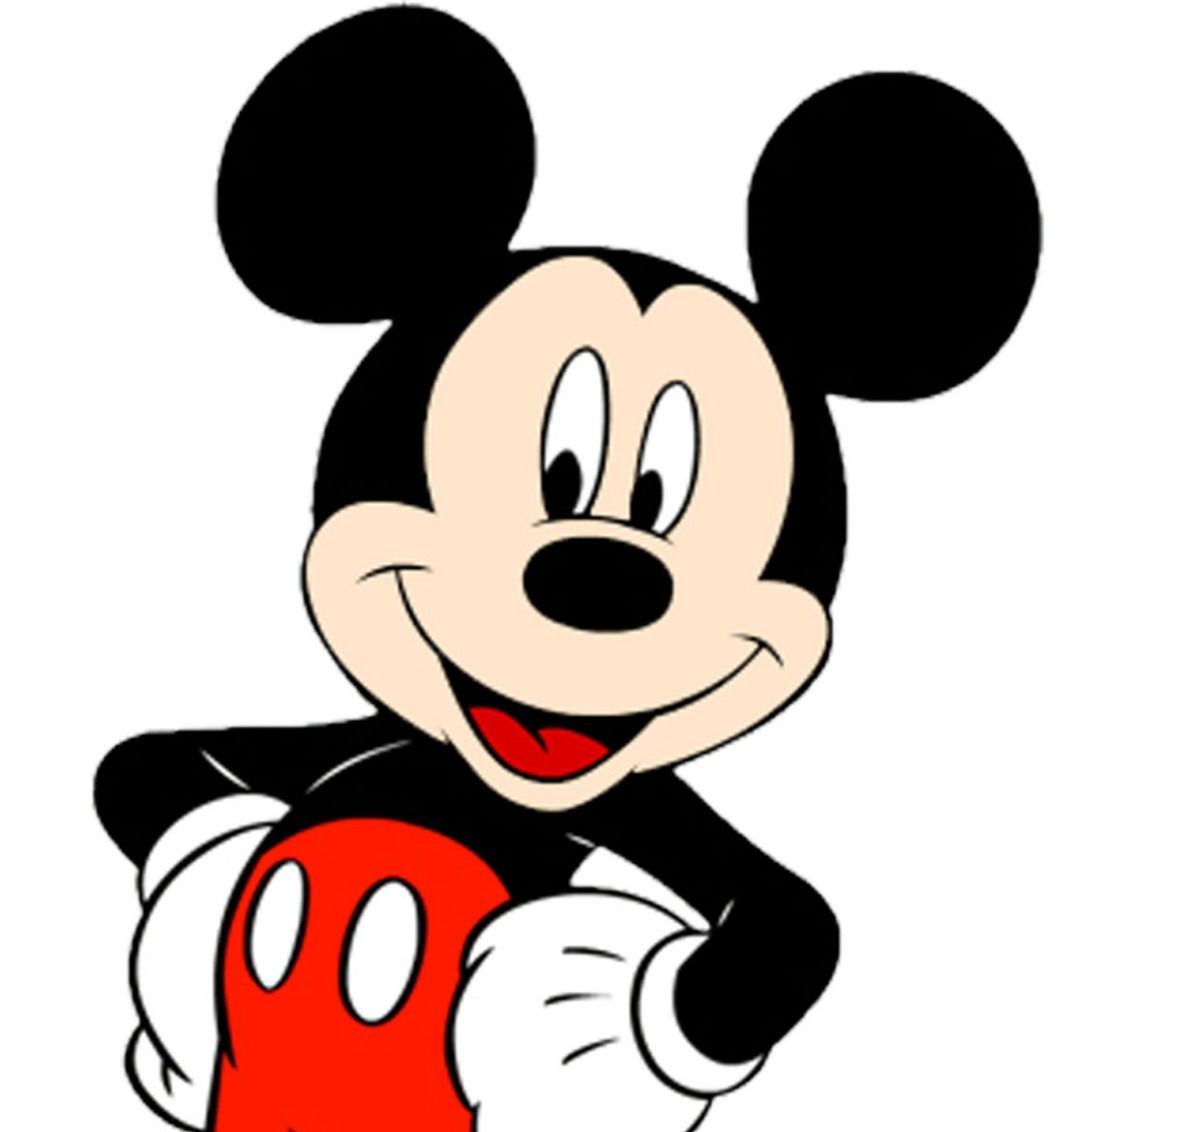 1200x1132px Mickey Mouse (85.9 KB).08.2015